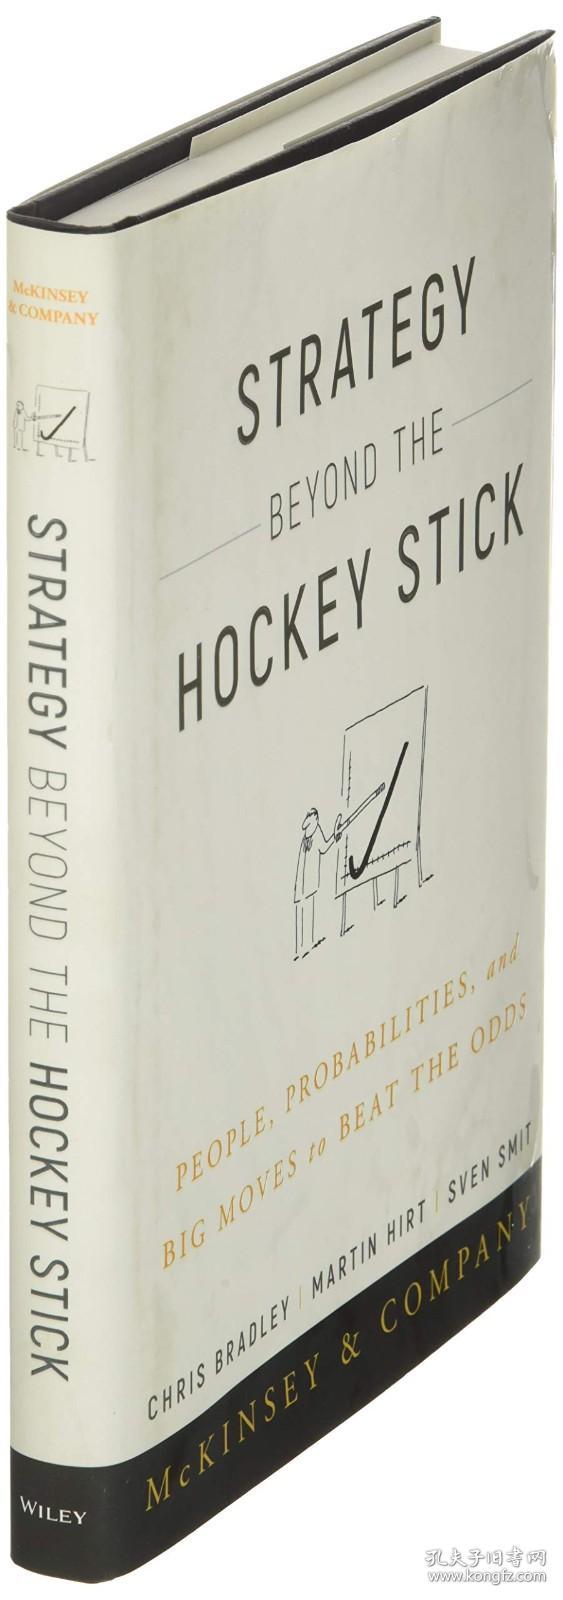 Strategy Beyond the Hockey Stick: People, Probabilities, and Big Moves to Beat the Odds 突破现实的困境：趋势、禀赋与企业家的大战略，英文原版